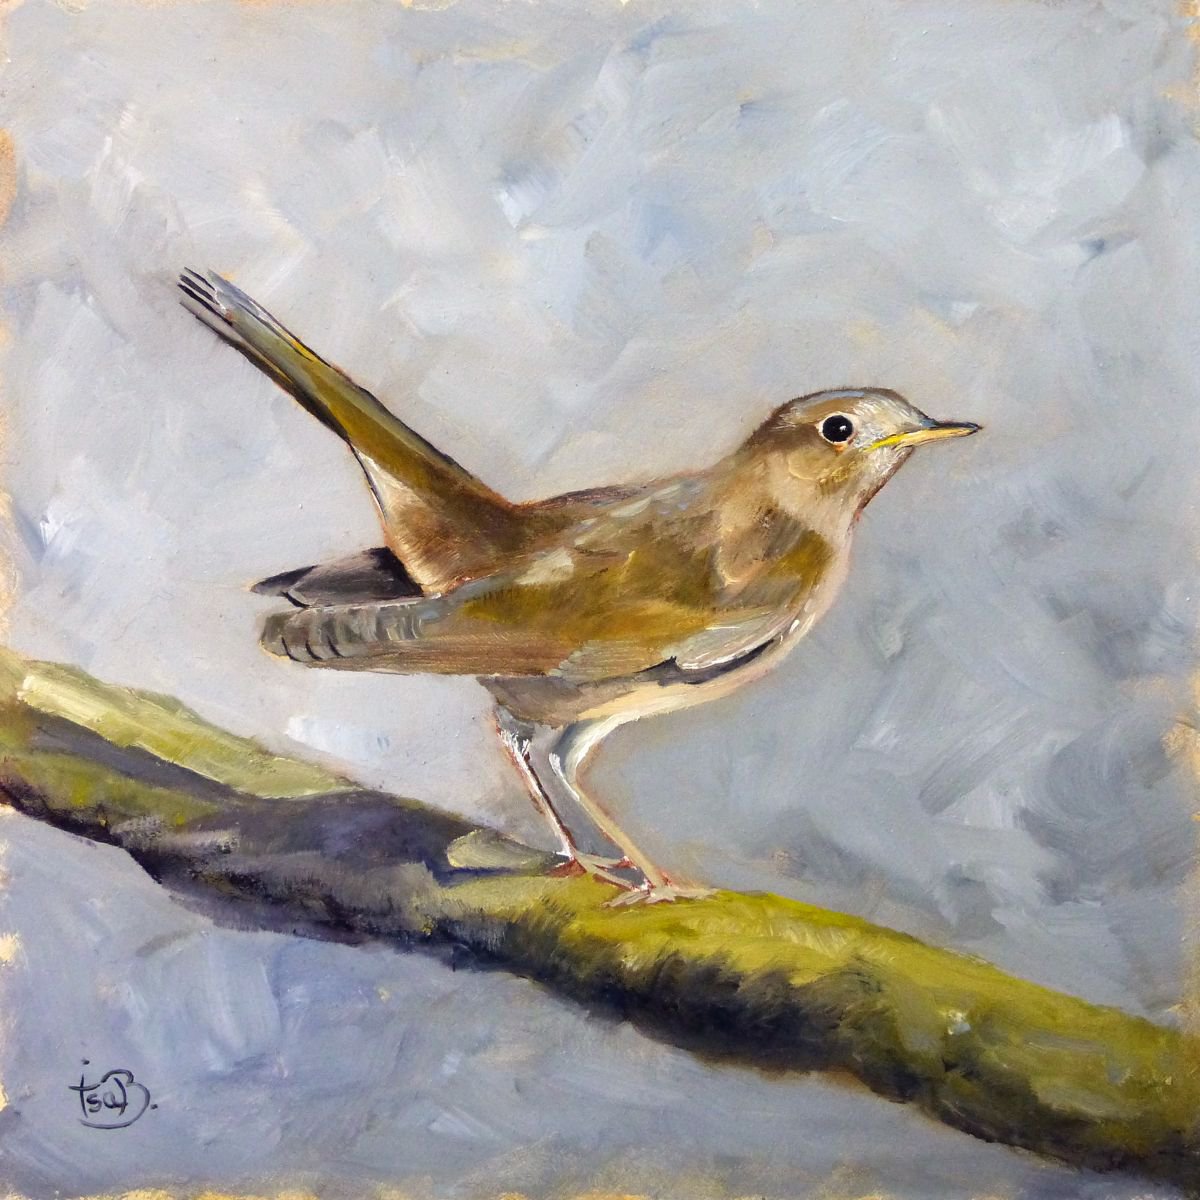 Nightingale by Isabelle Boulanger